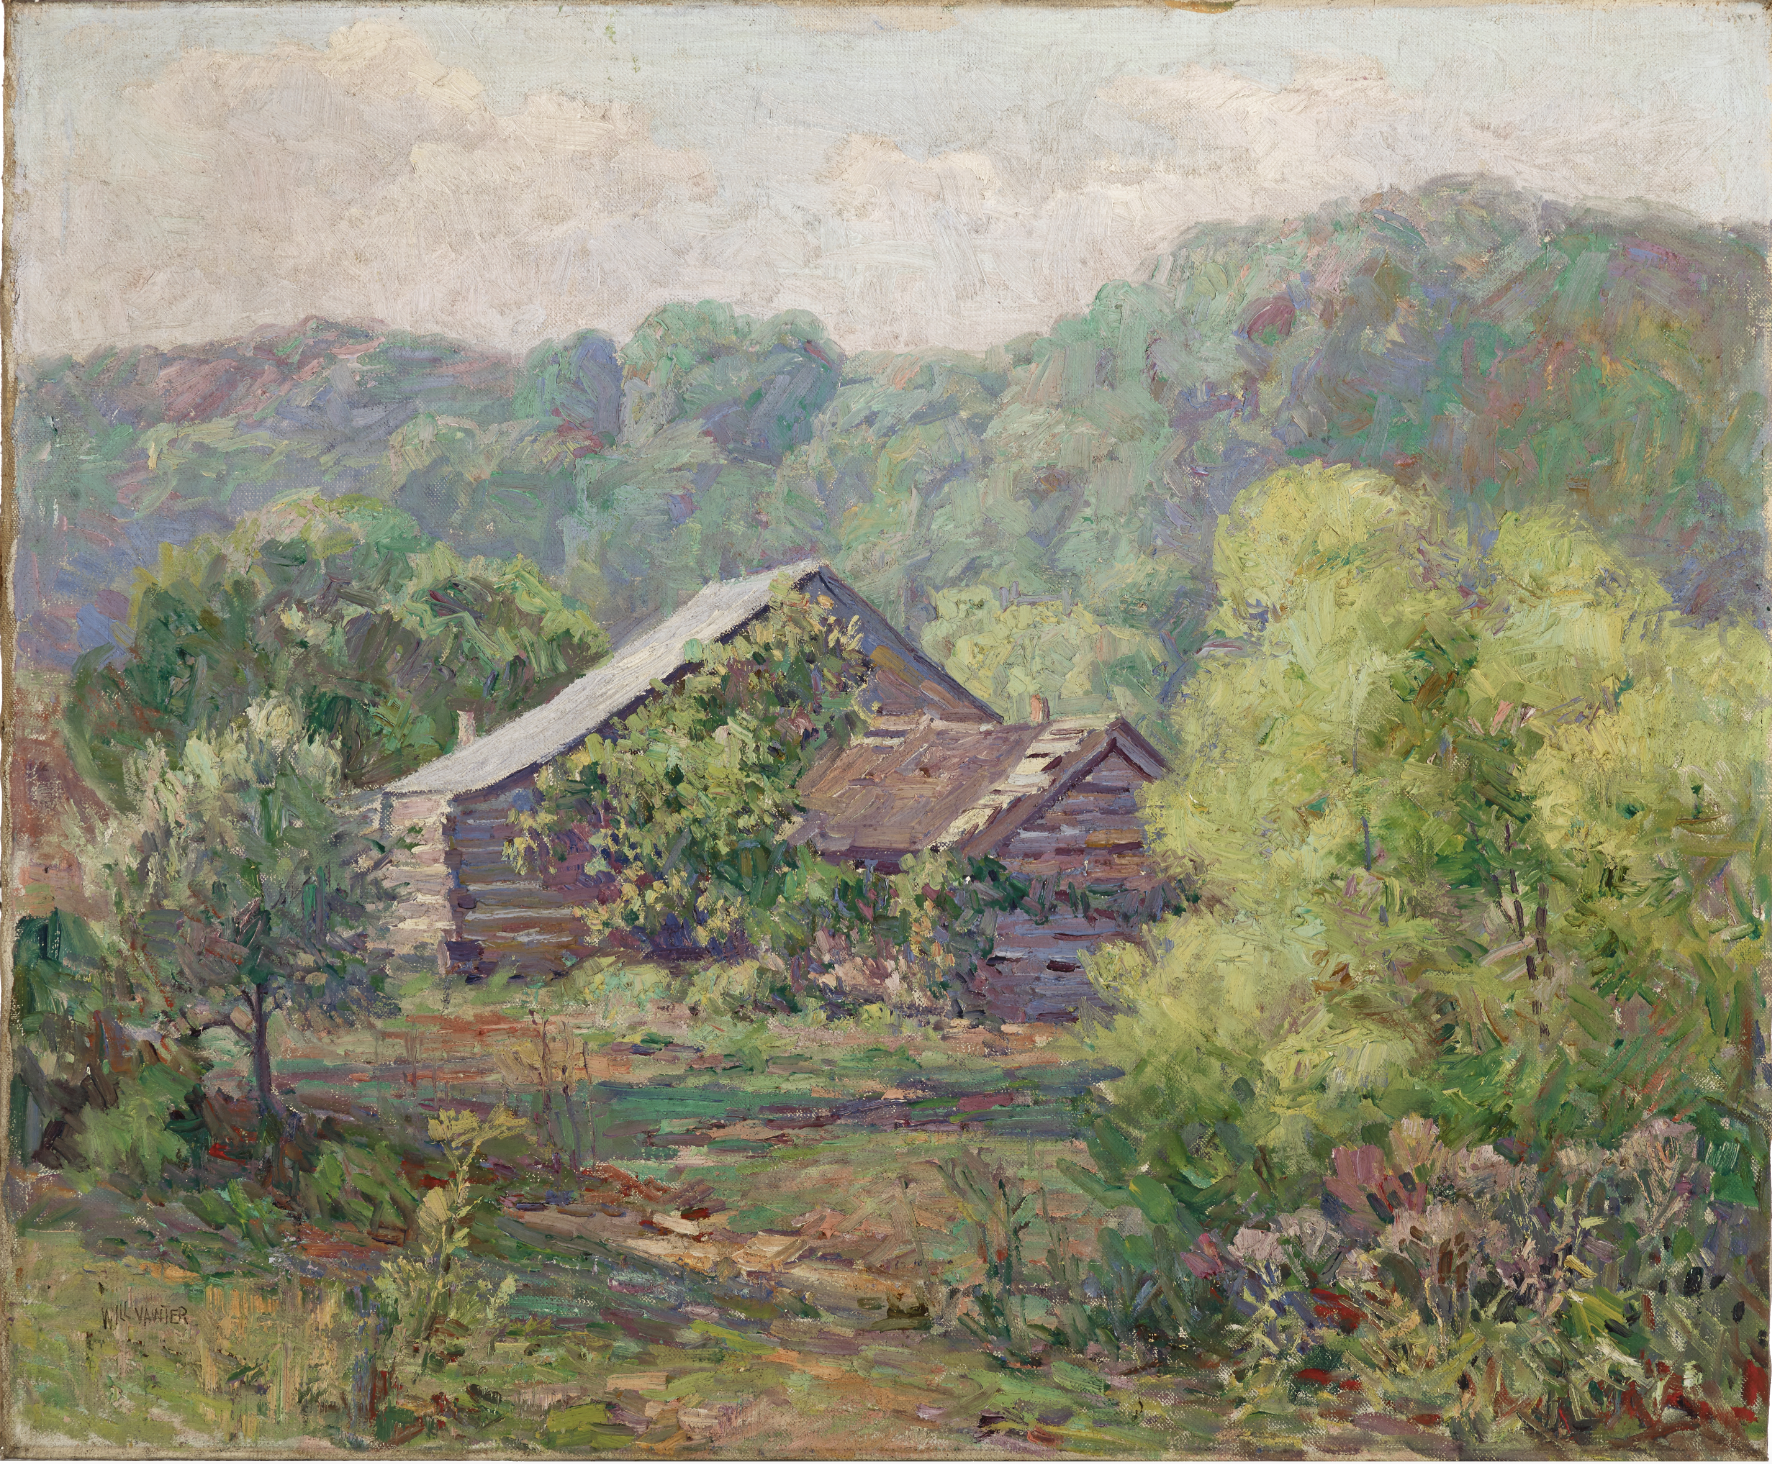 An impressionist style painting that shows a log cabin settled in the middle of a wooded area. 